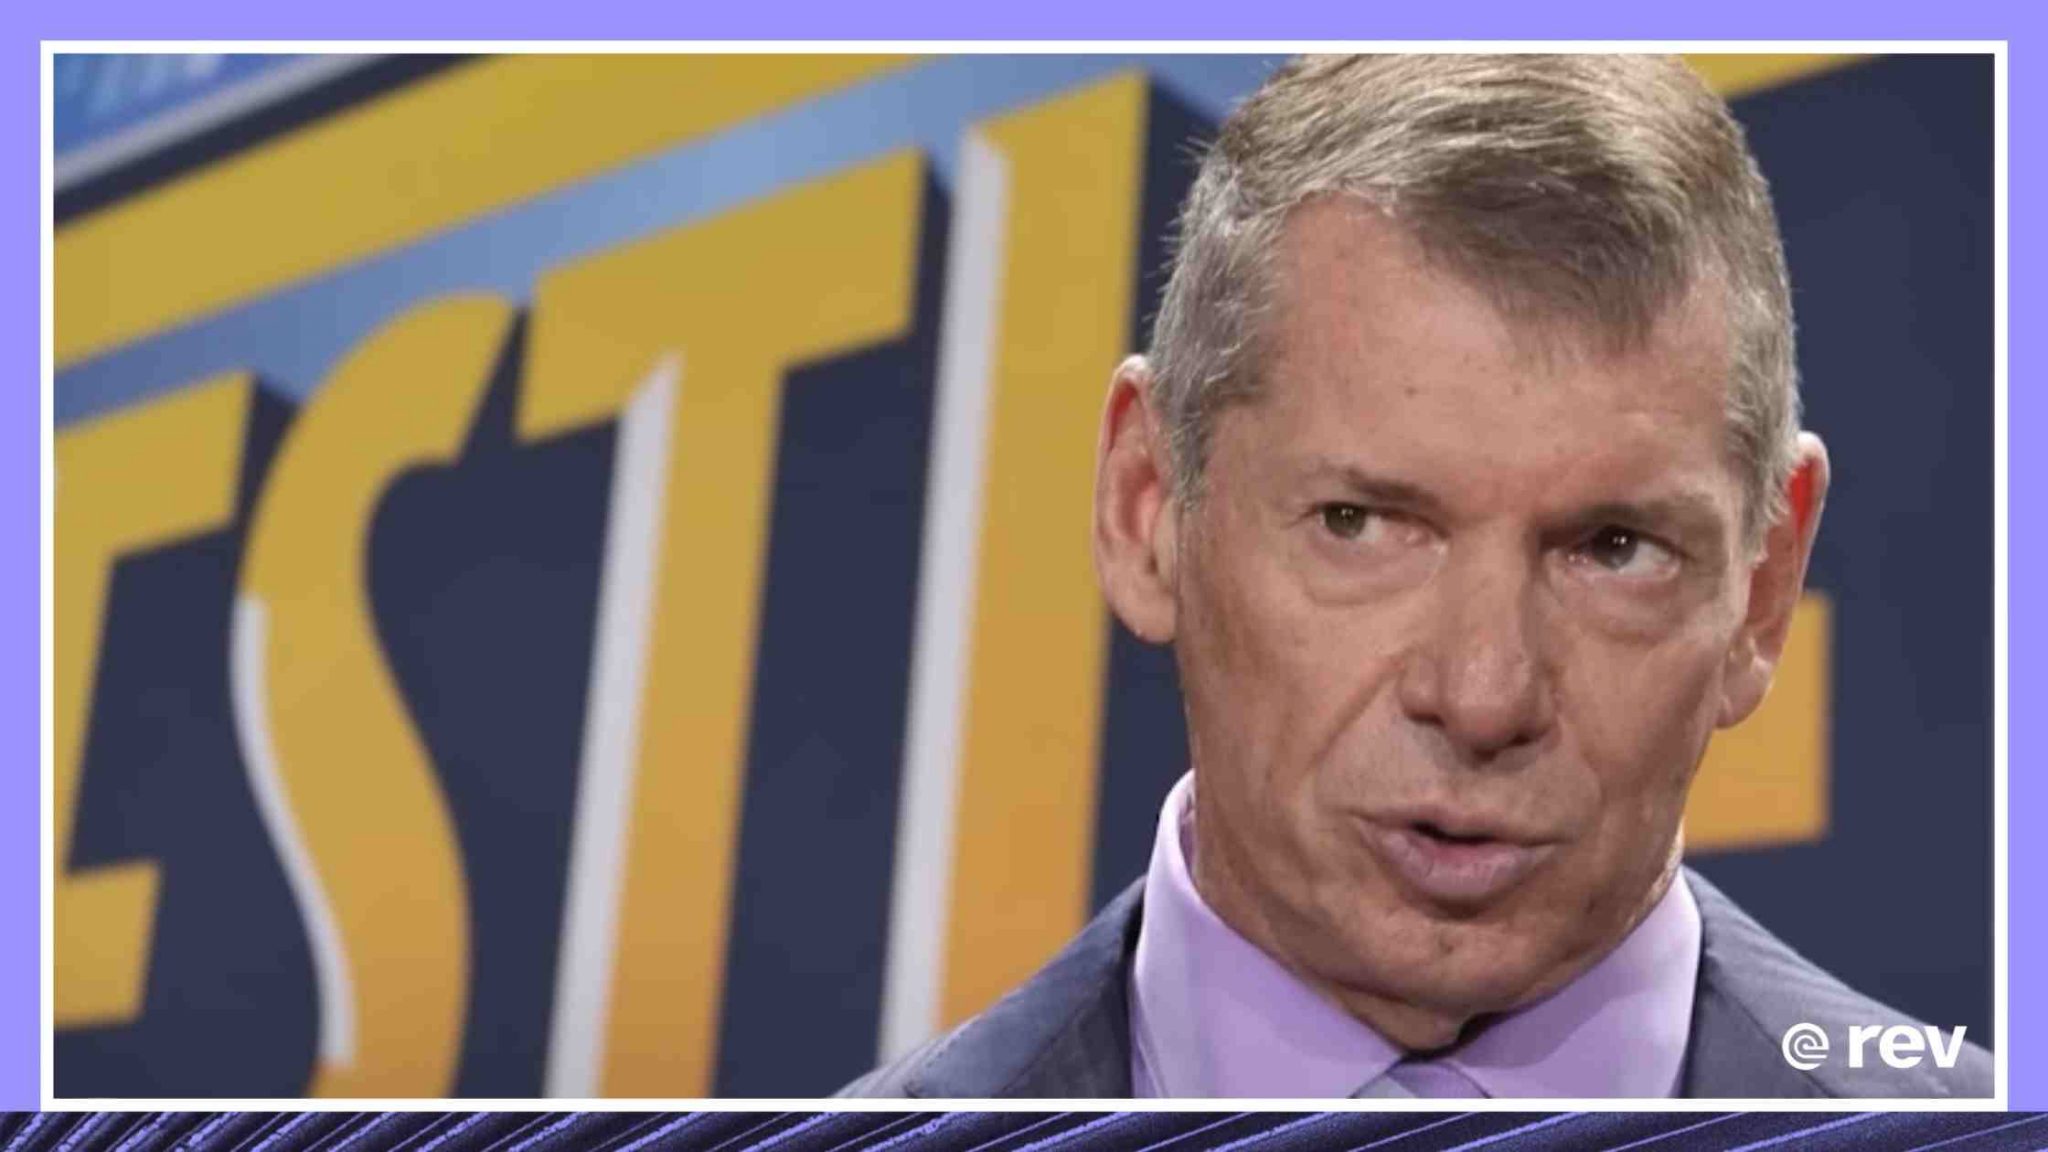 Hush money allegations force WWE CEO Vince McMahon to step down 6/17/22 Transcript